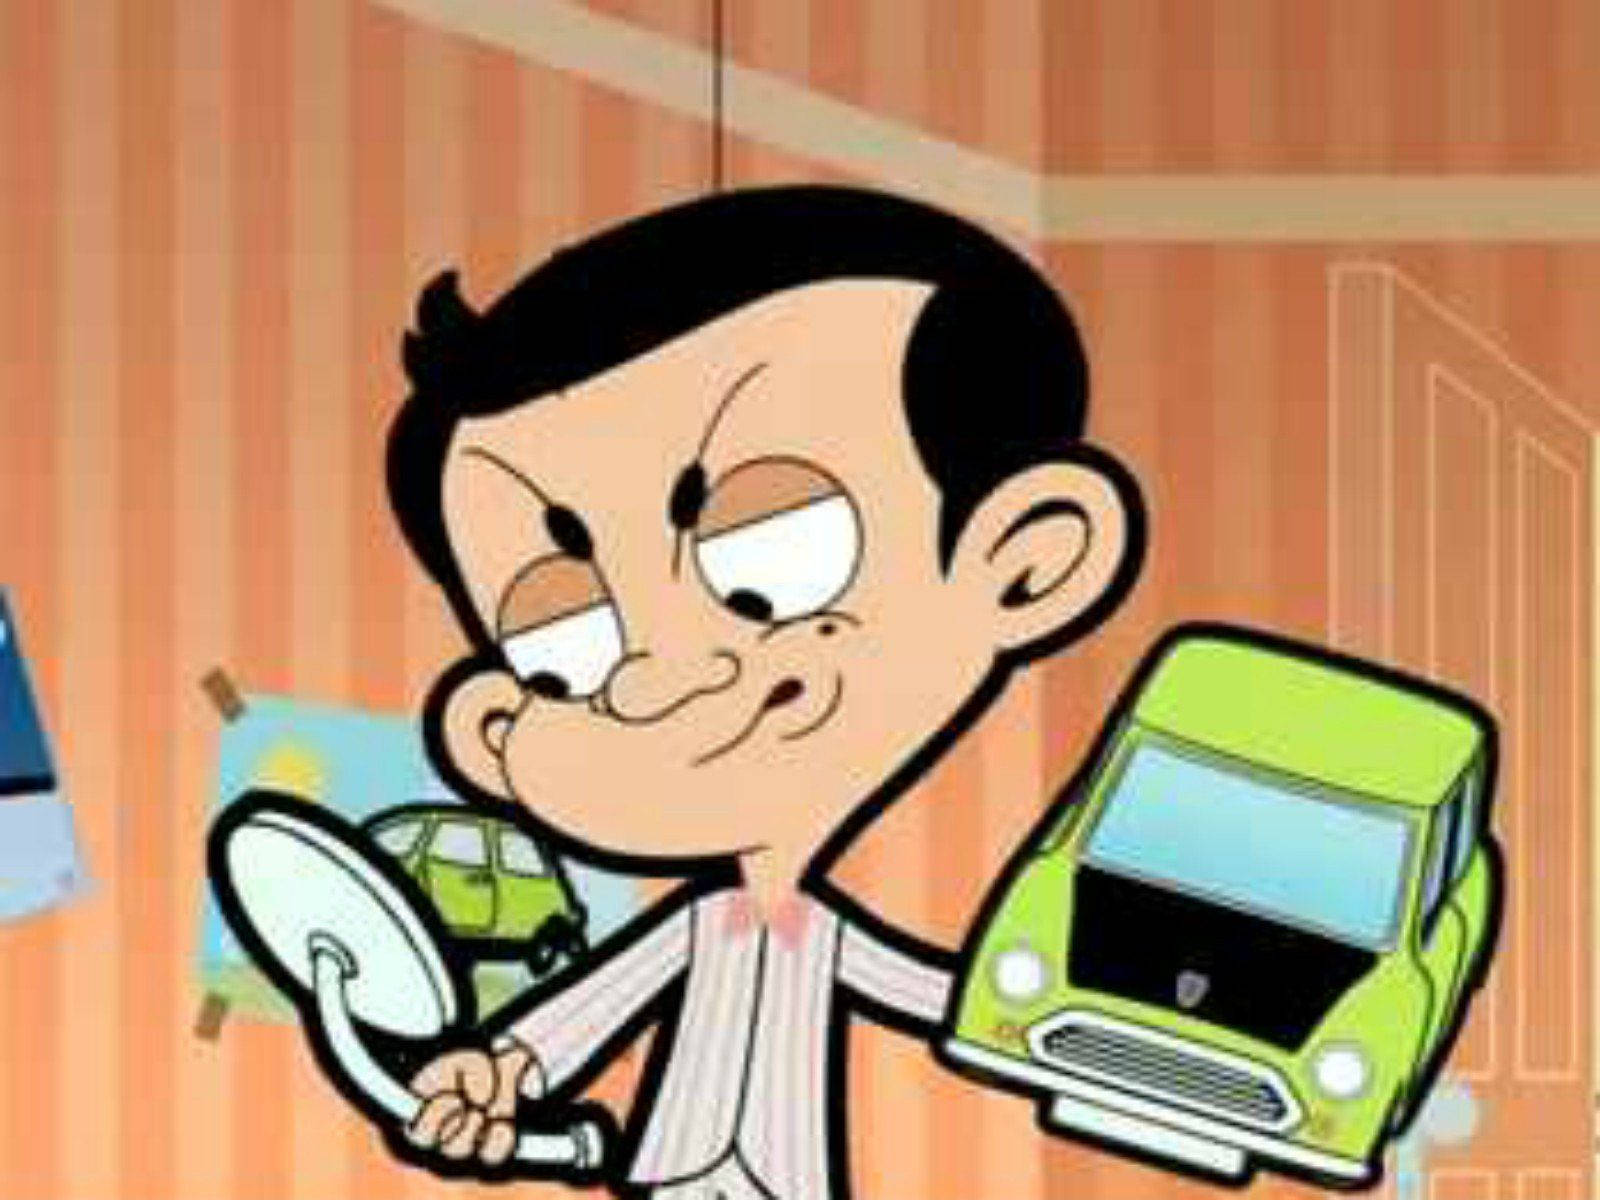 Mr. Bean Cartoon Confused Toy Background